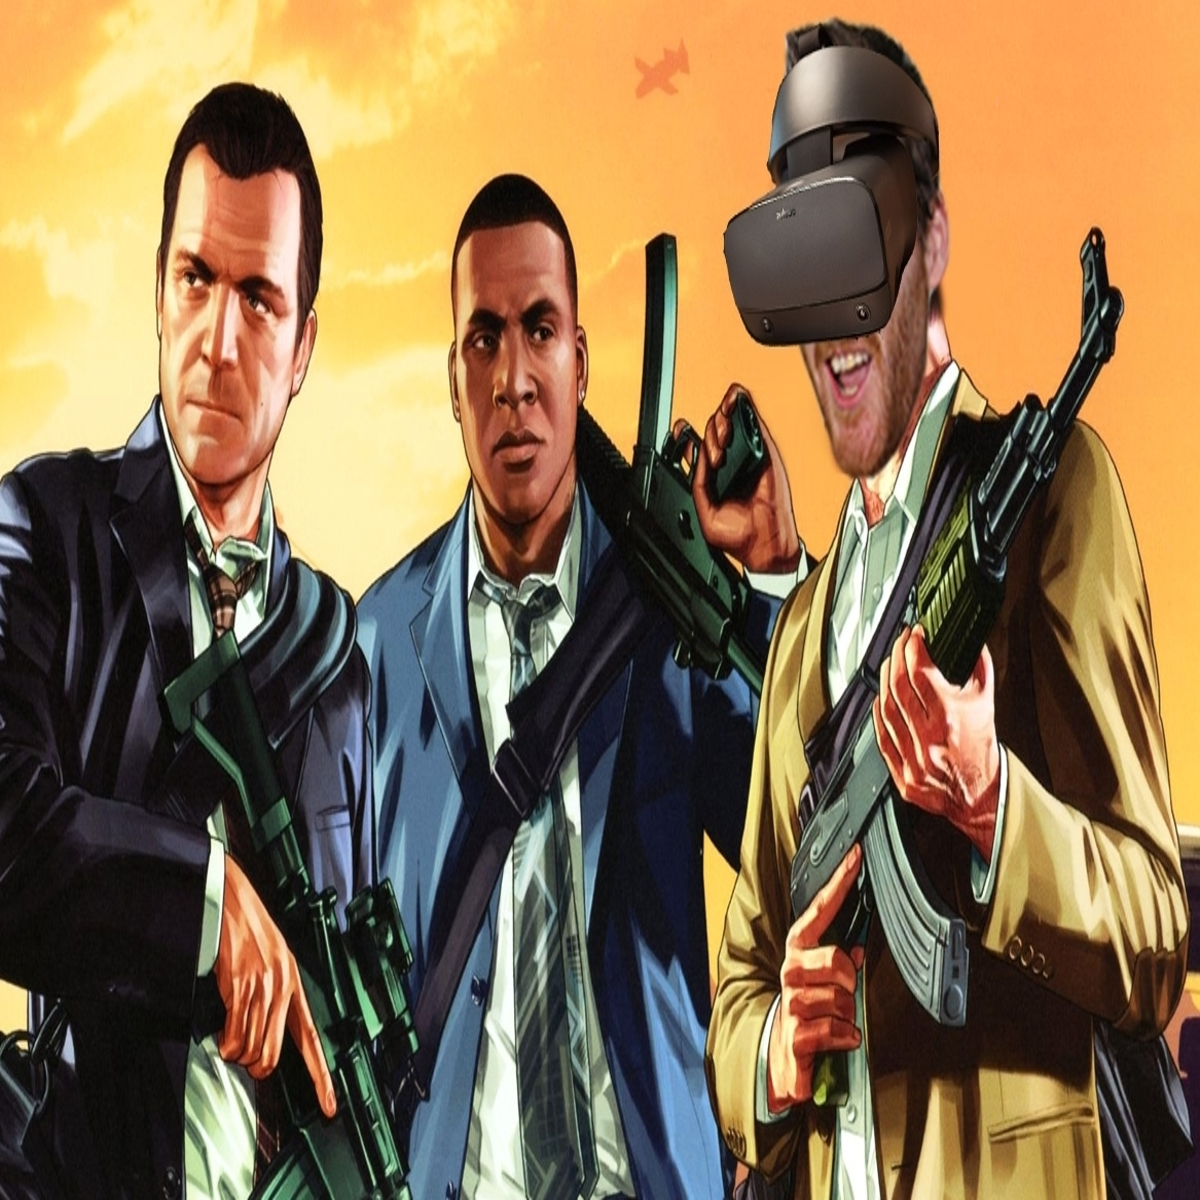 GTA 5 Mod Lets You Play the Entire Game in Virtual Reality - TechEBlog